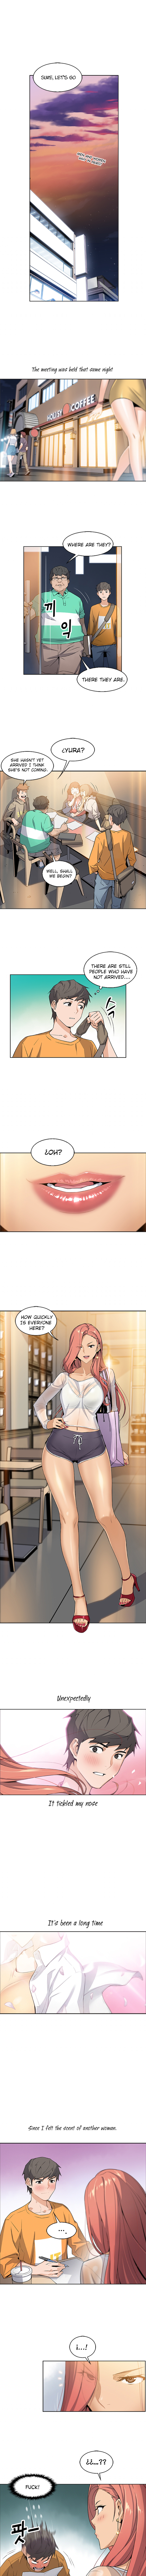 Housekeeper Manhwa - Chapter 1 Page 9